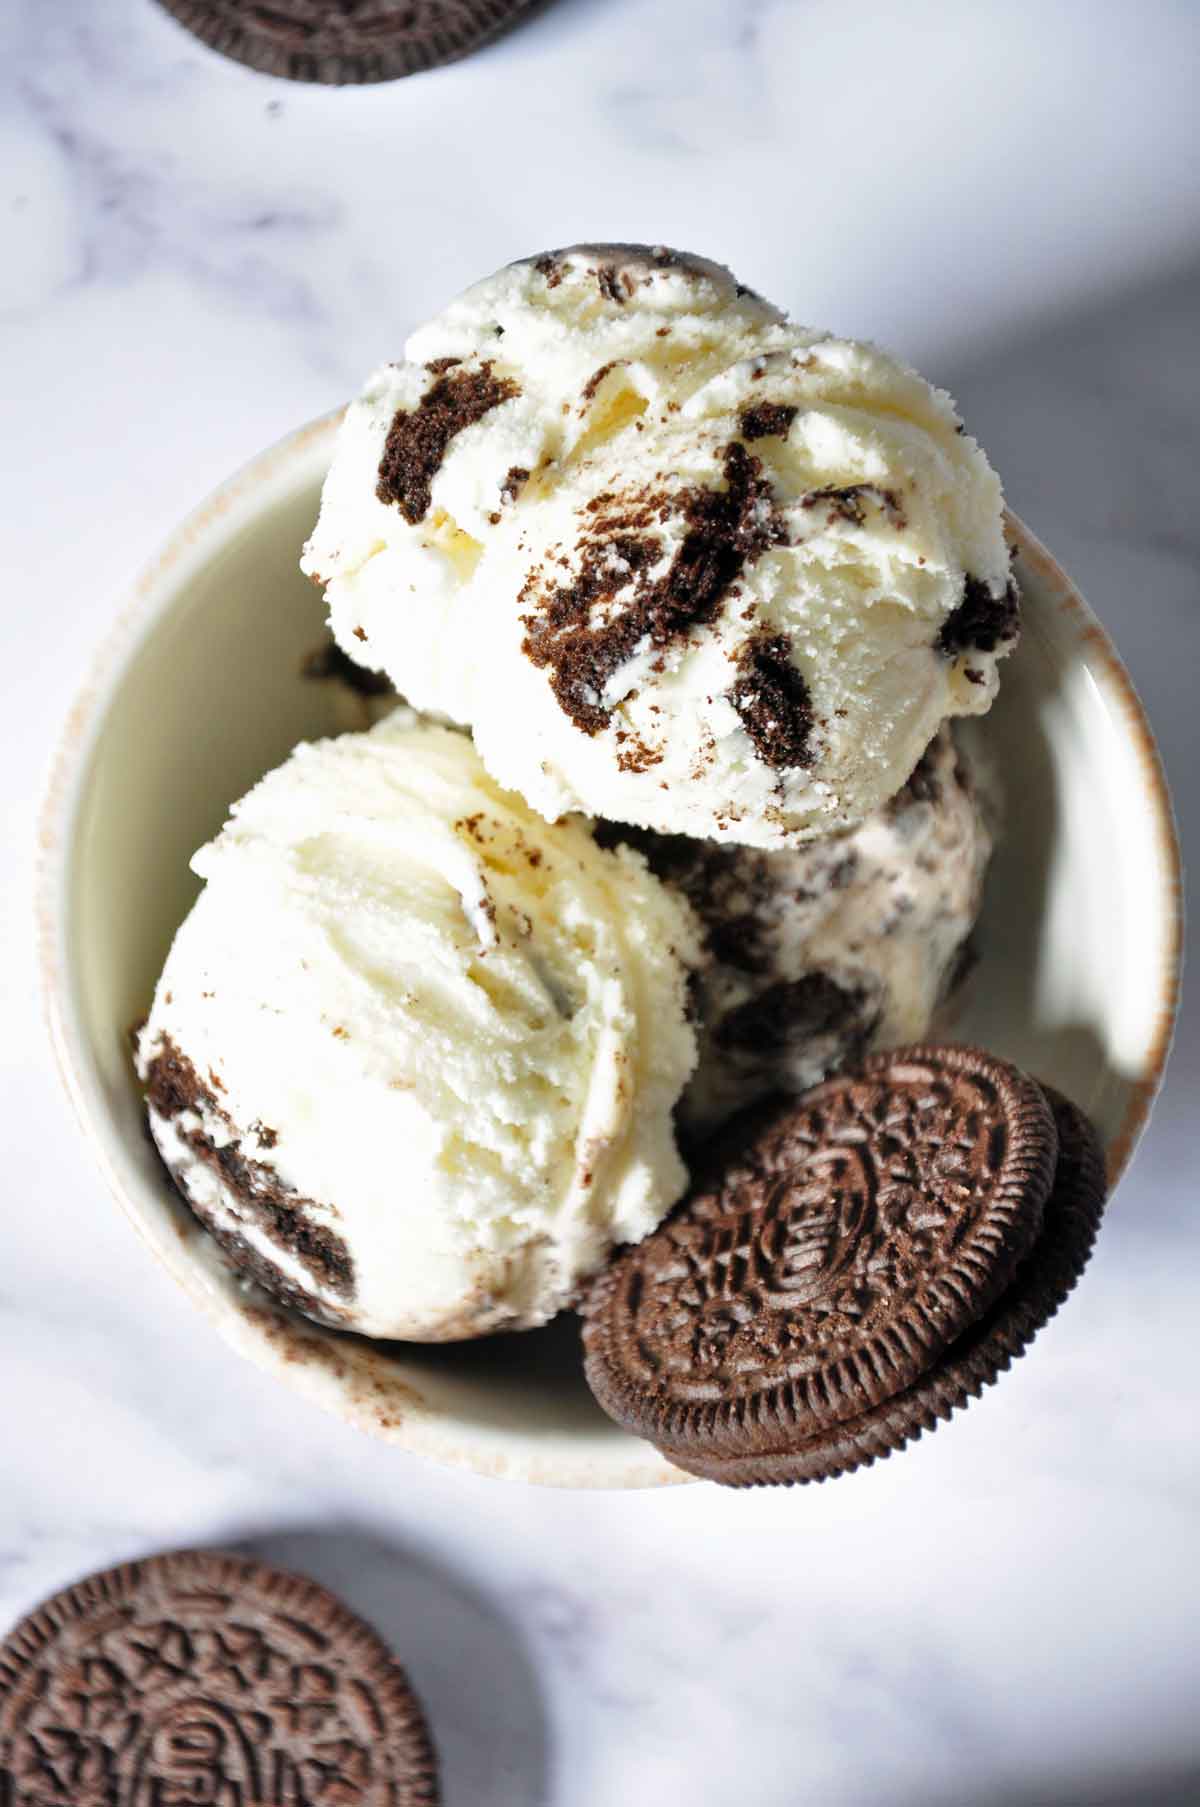 Three scoops of Oreo ice cream with 1 oreo cookie in a bowl and 1 oreo cookie in the foreground.